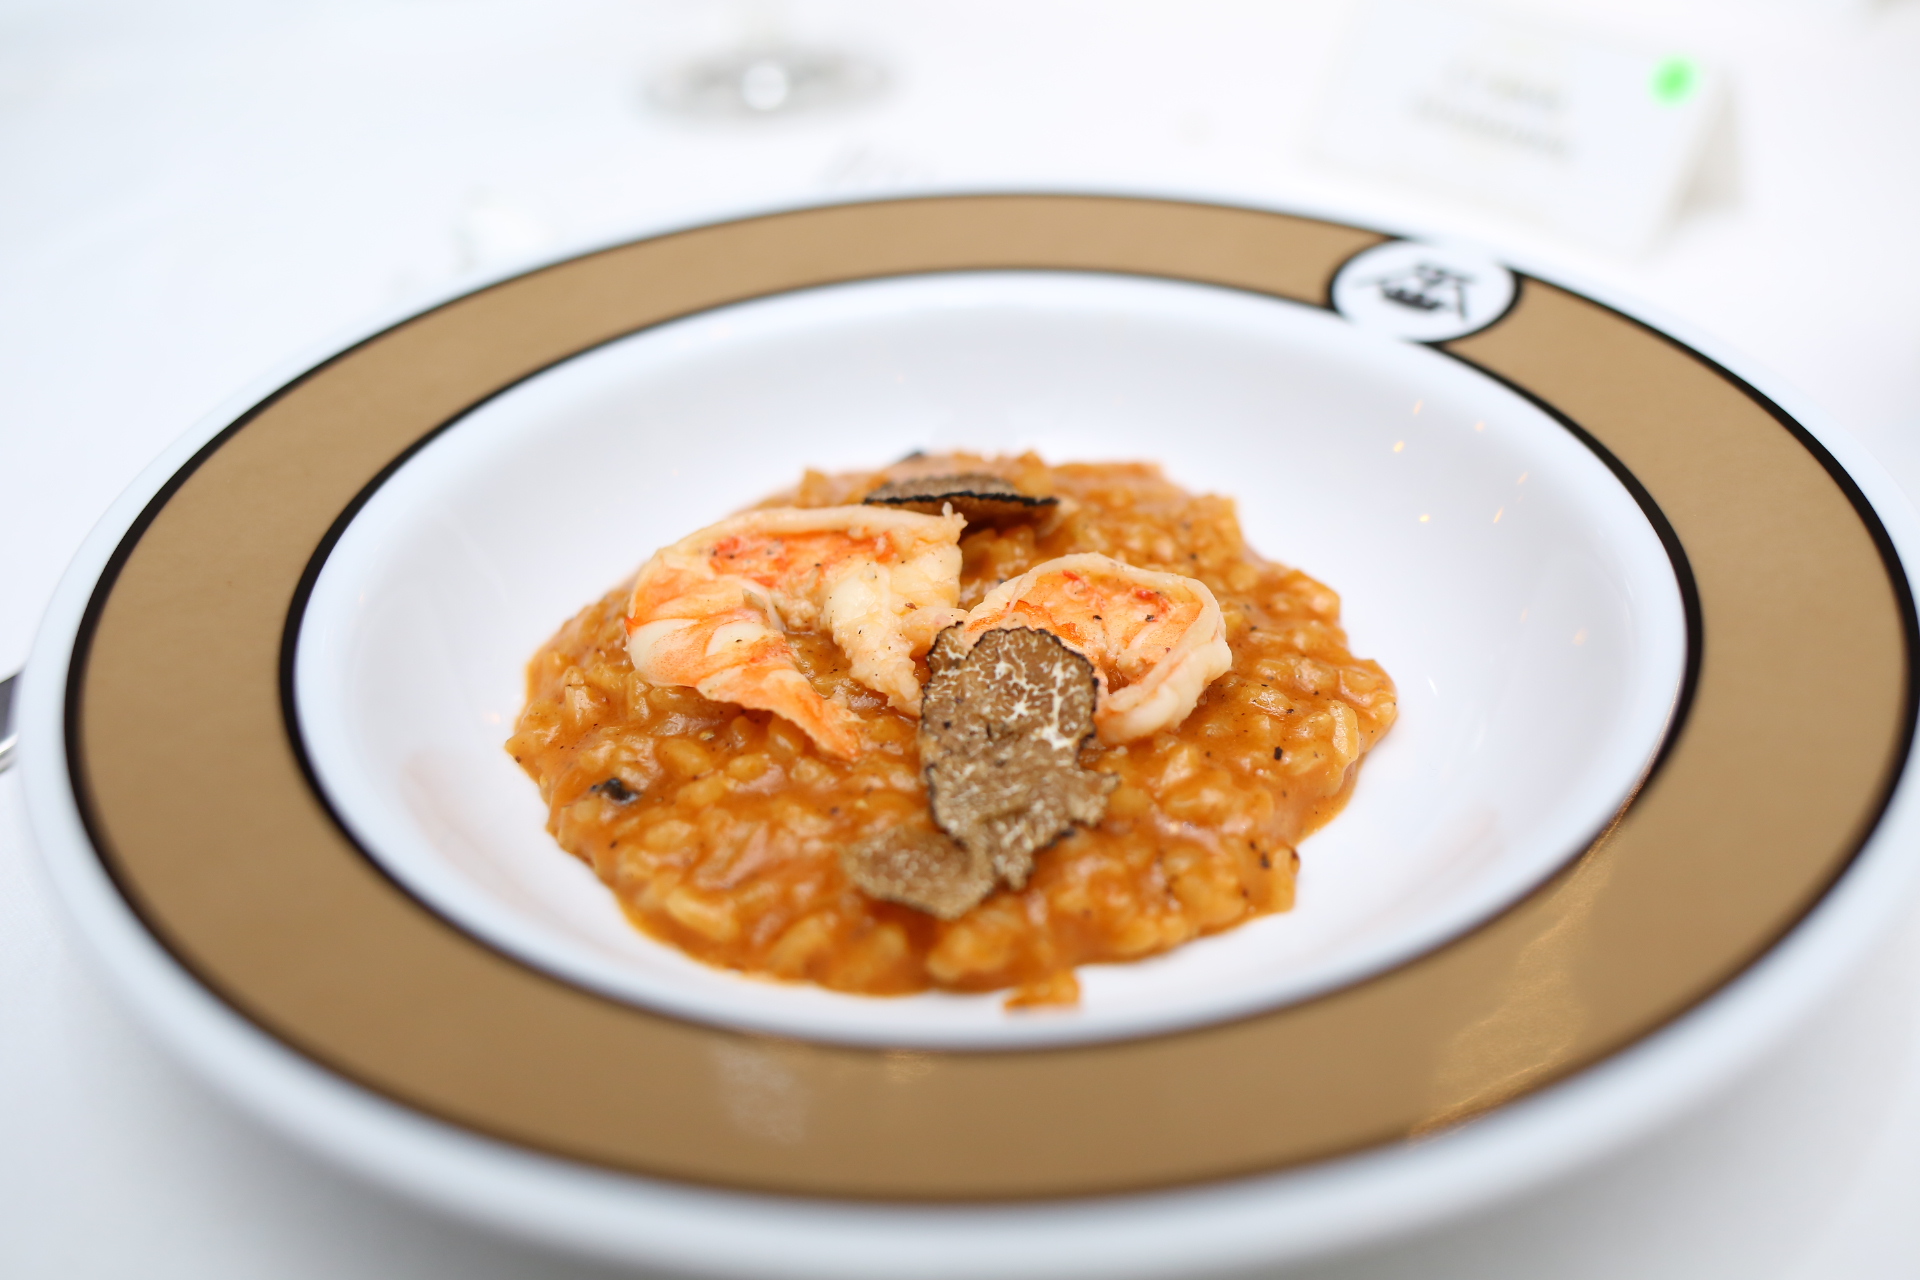 77. Risotto with Scampi and Truffle